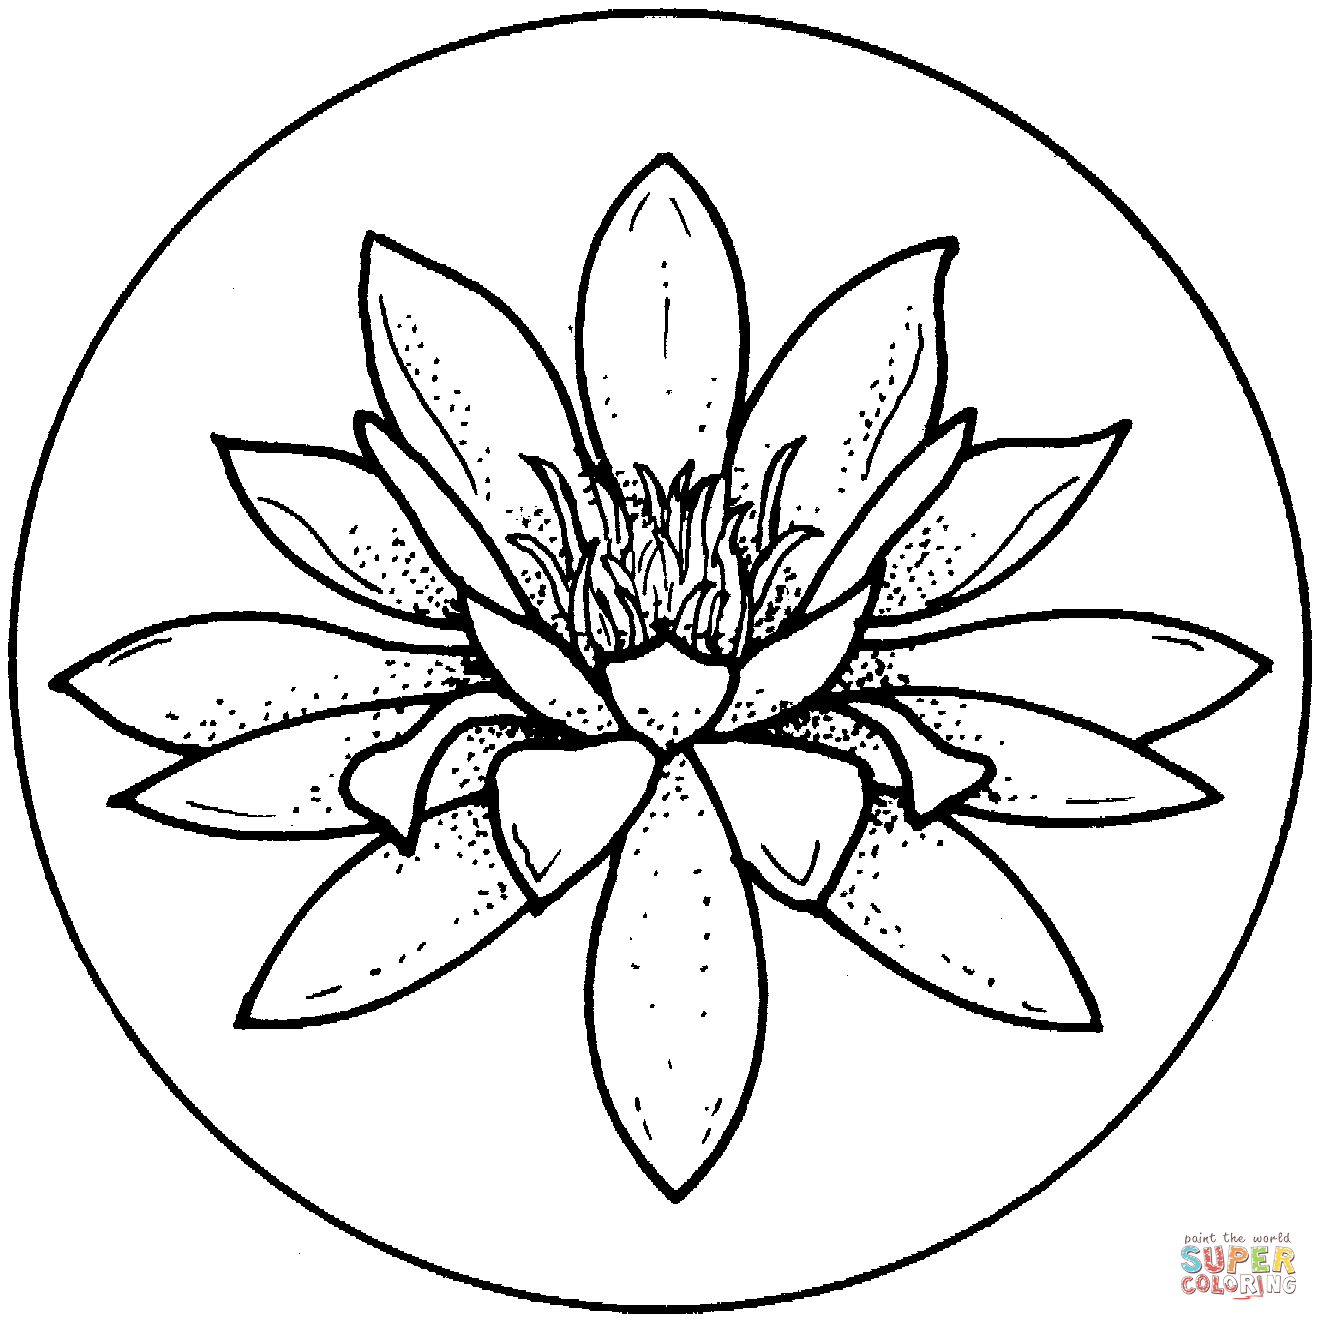 Lily Of The Valley Coloring Page Water Lily Blossom Coloring Page Free Printable Coloring Pages